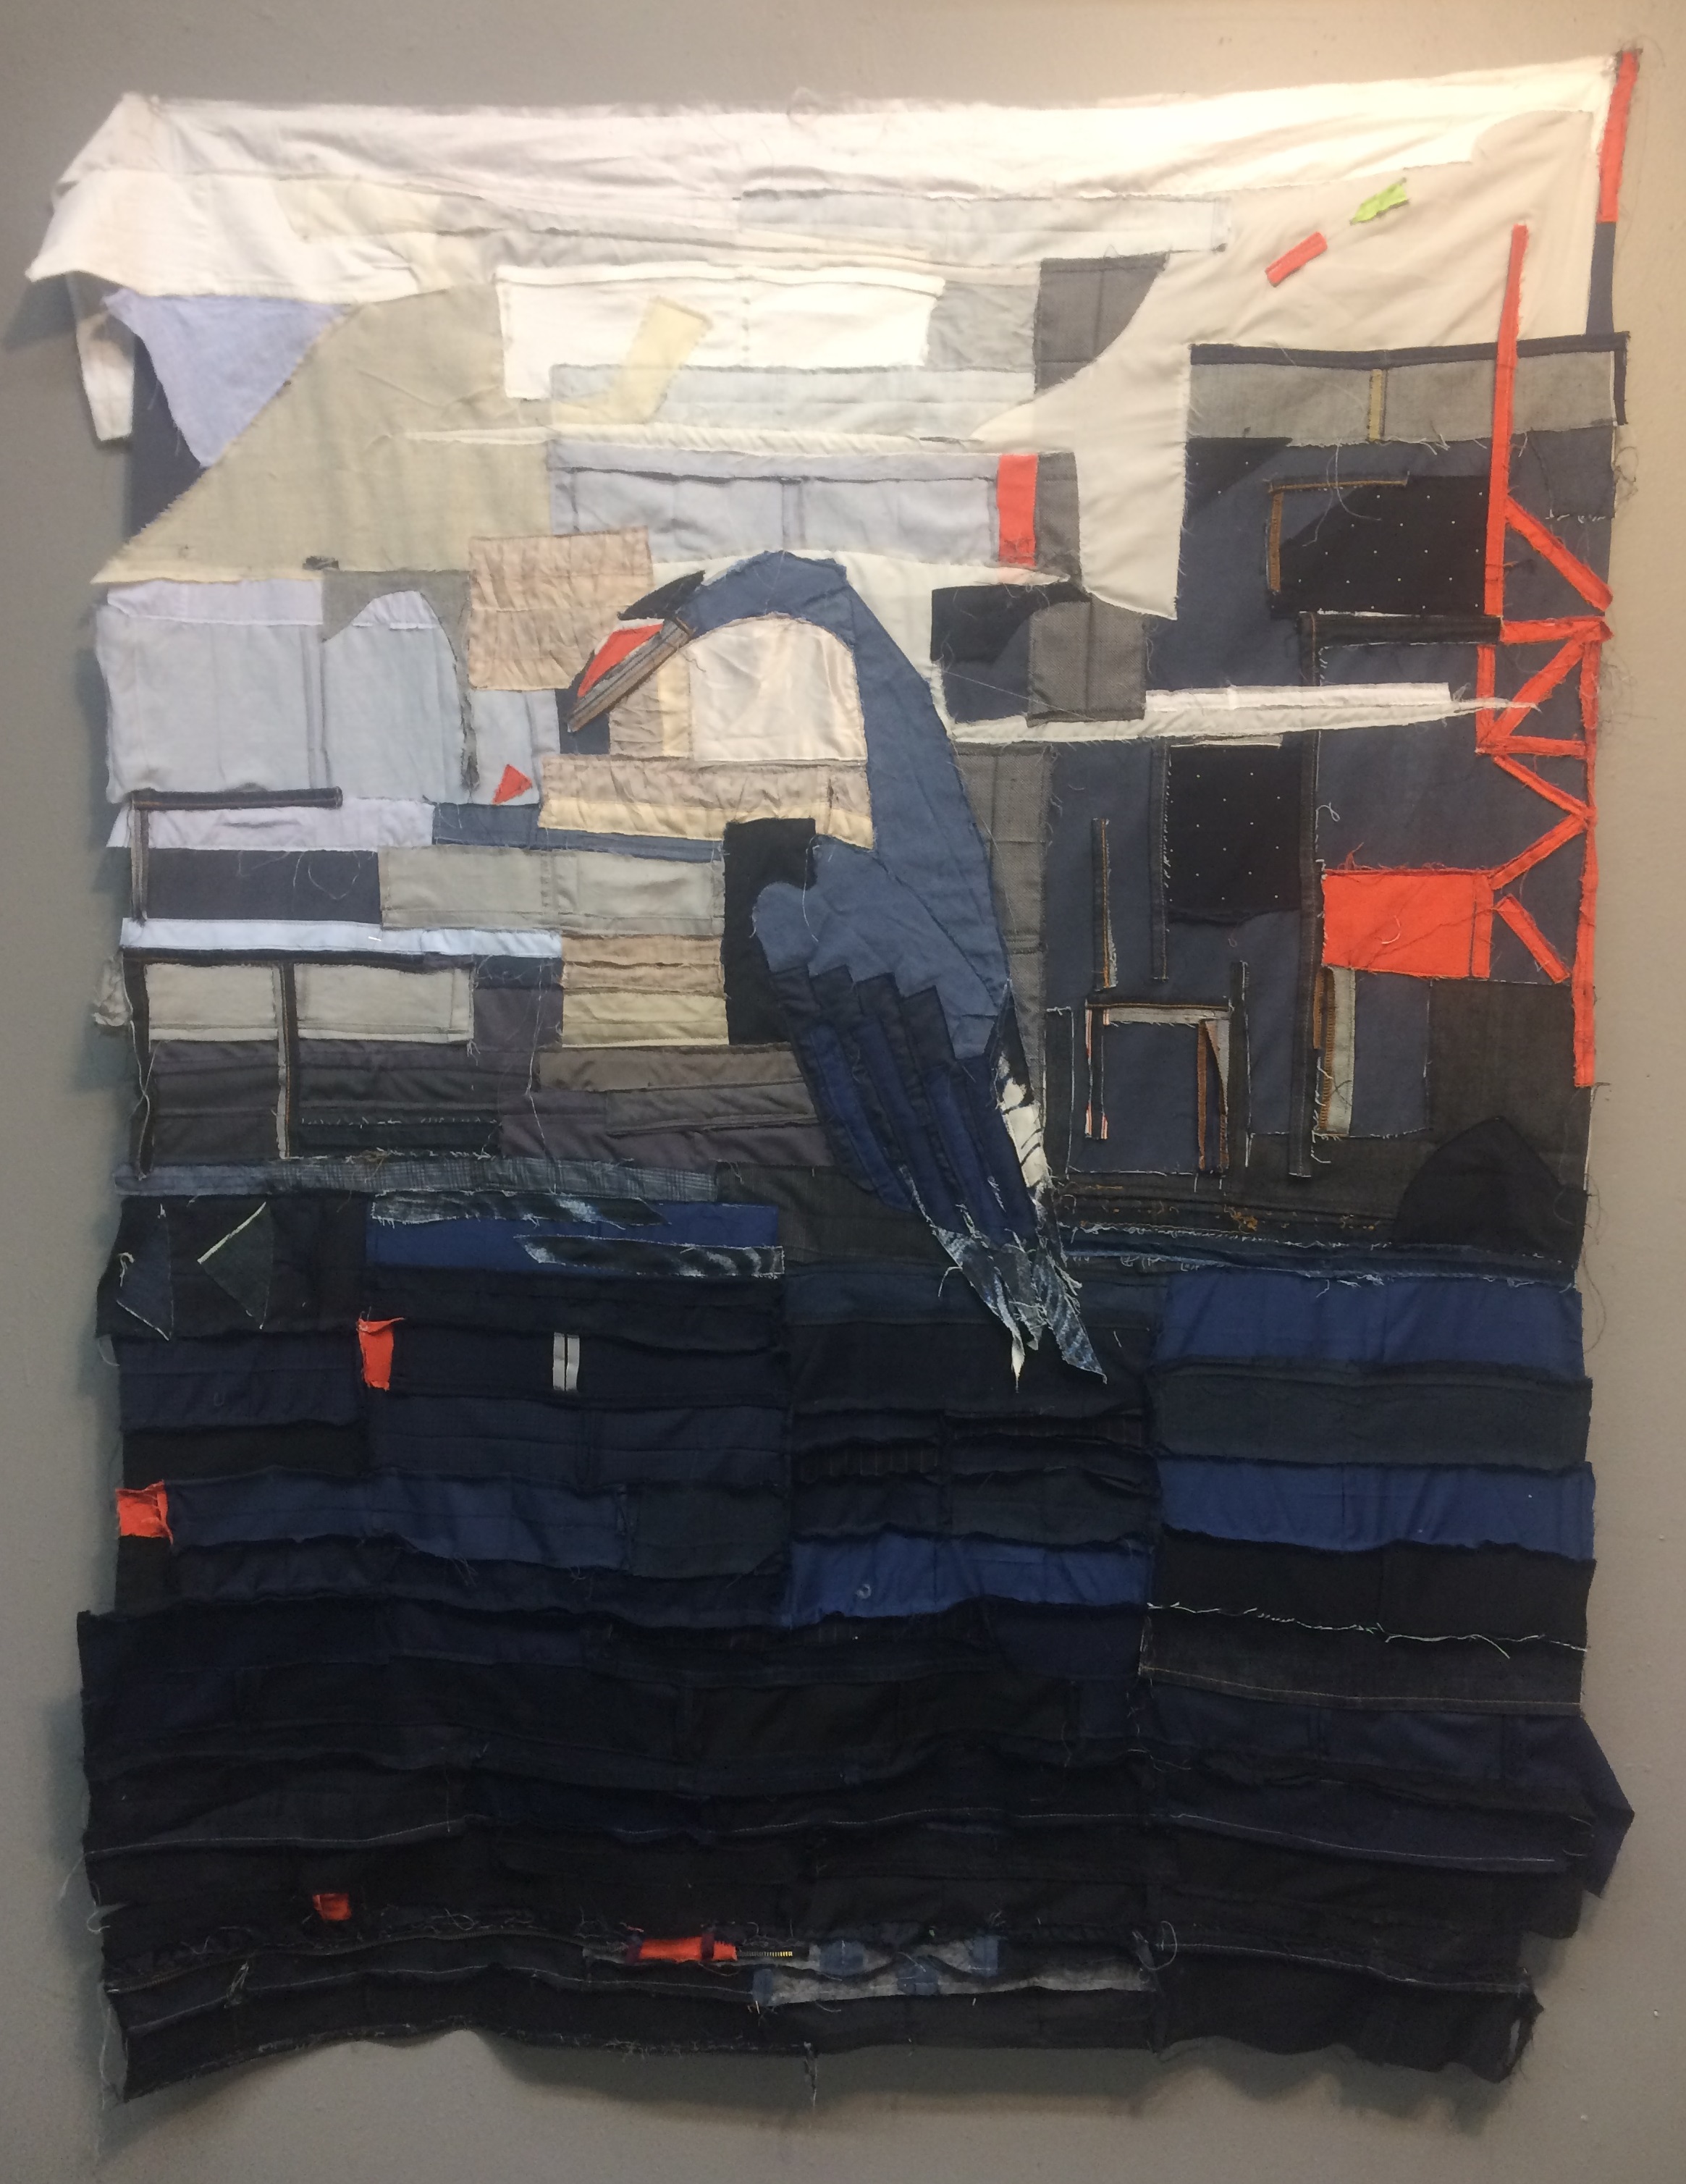 Where flapping herons wake, fabric and hems saved from alterations, 2017